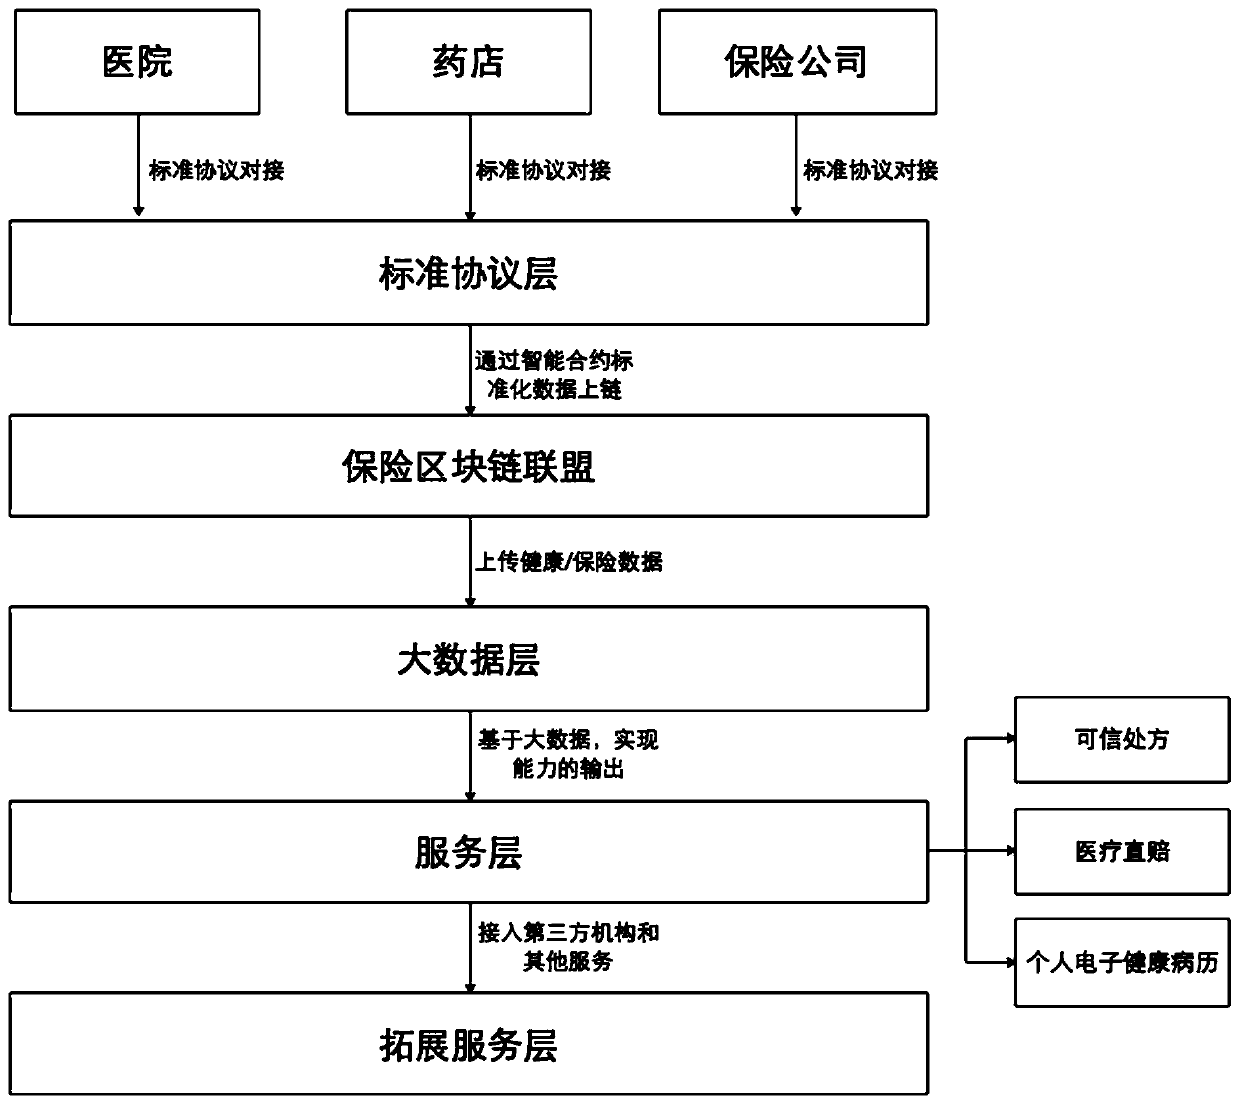 Medical data sharing system and method based on block chain